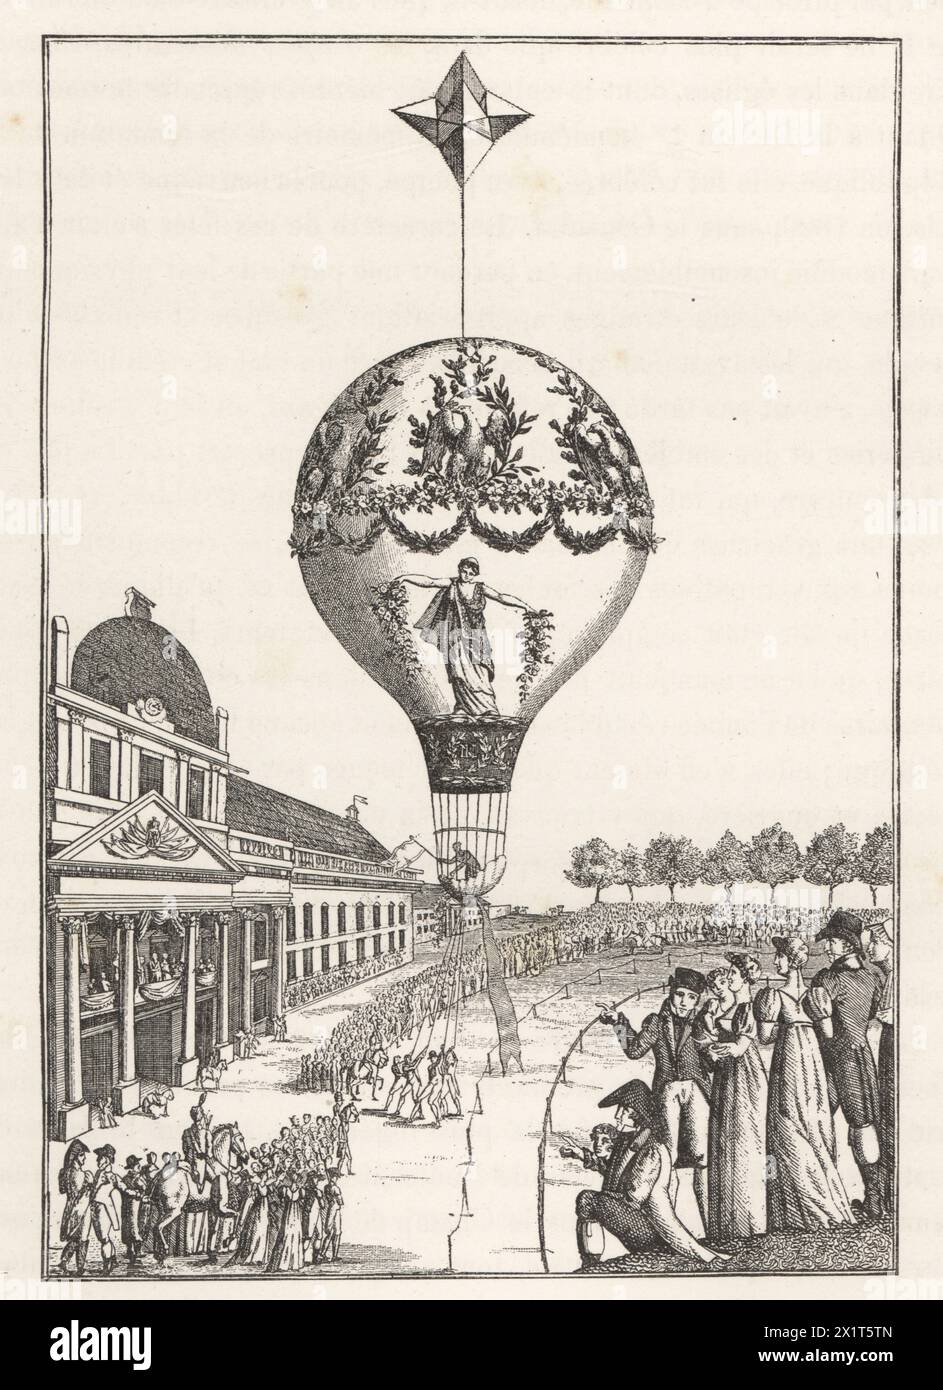 Balloon flight by aeronaut Madame Sophie Blanchard on the Champ de Mars, 24 June 1810. During the festival given by the Garde Imperiale to celebrate the marriage of Napoleon to Marie-Louise of Austria. Illustration from Paul Lacroix's Directoire, Consulat et Empire, (Directory, Consulate and Empire), Paris, 1884. Stock Photo